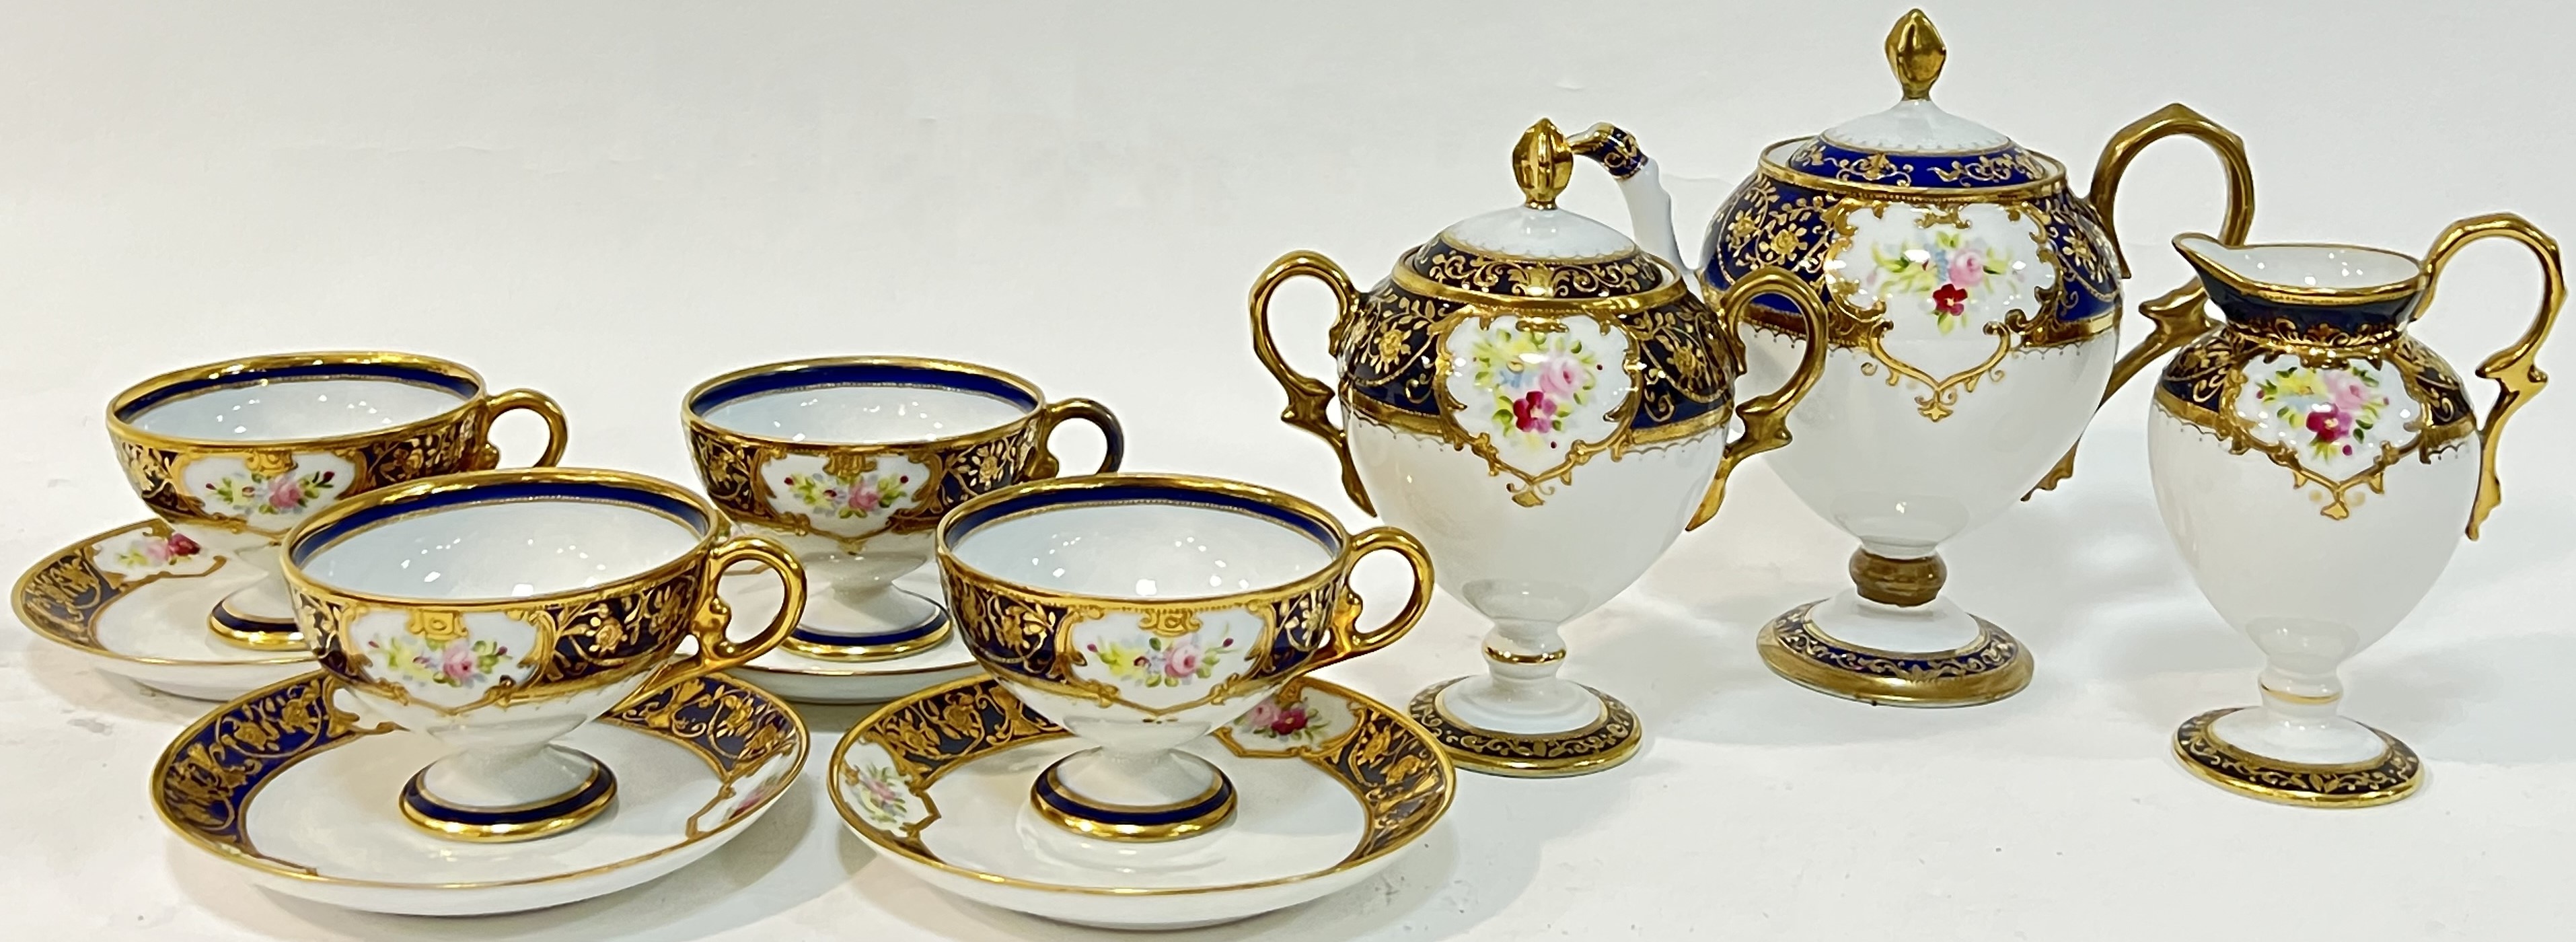 A Japanese Noritake fine porcelain tea or coffee set with blue and gilt decoration and enamelled